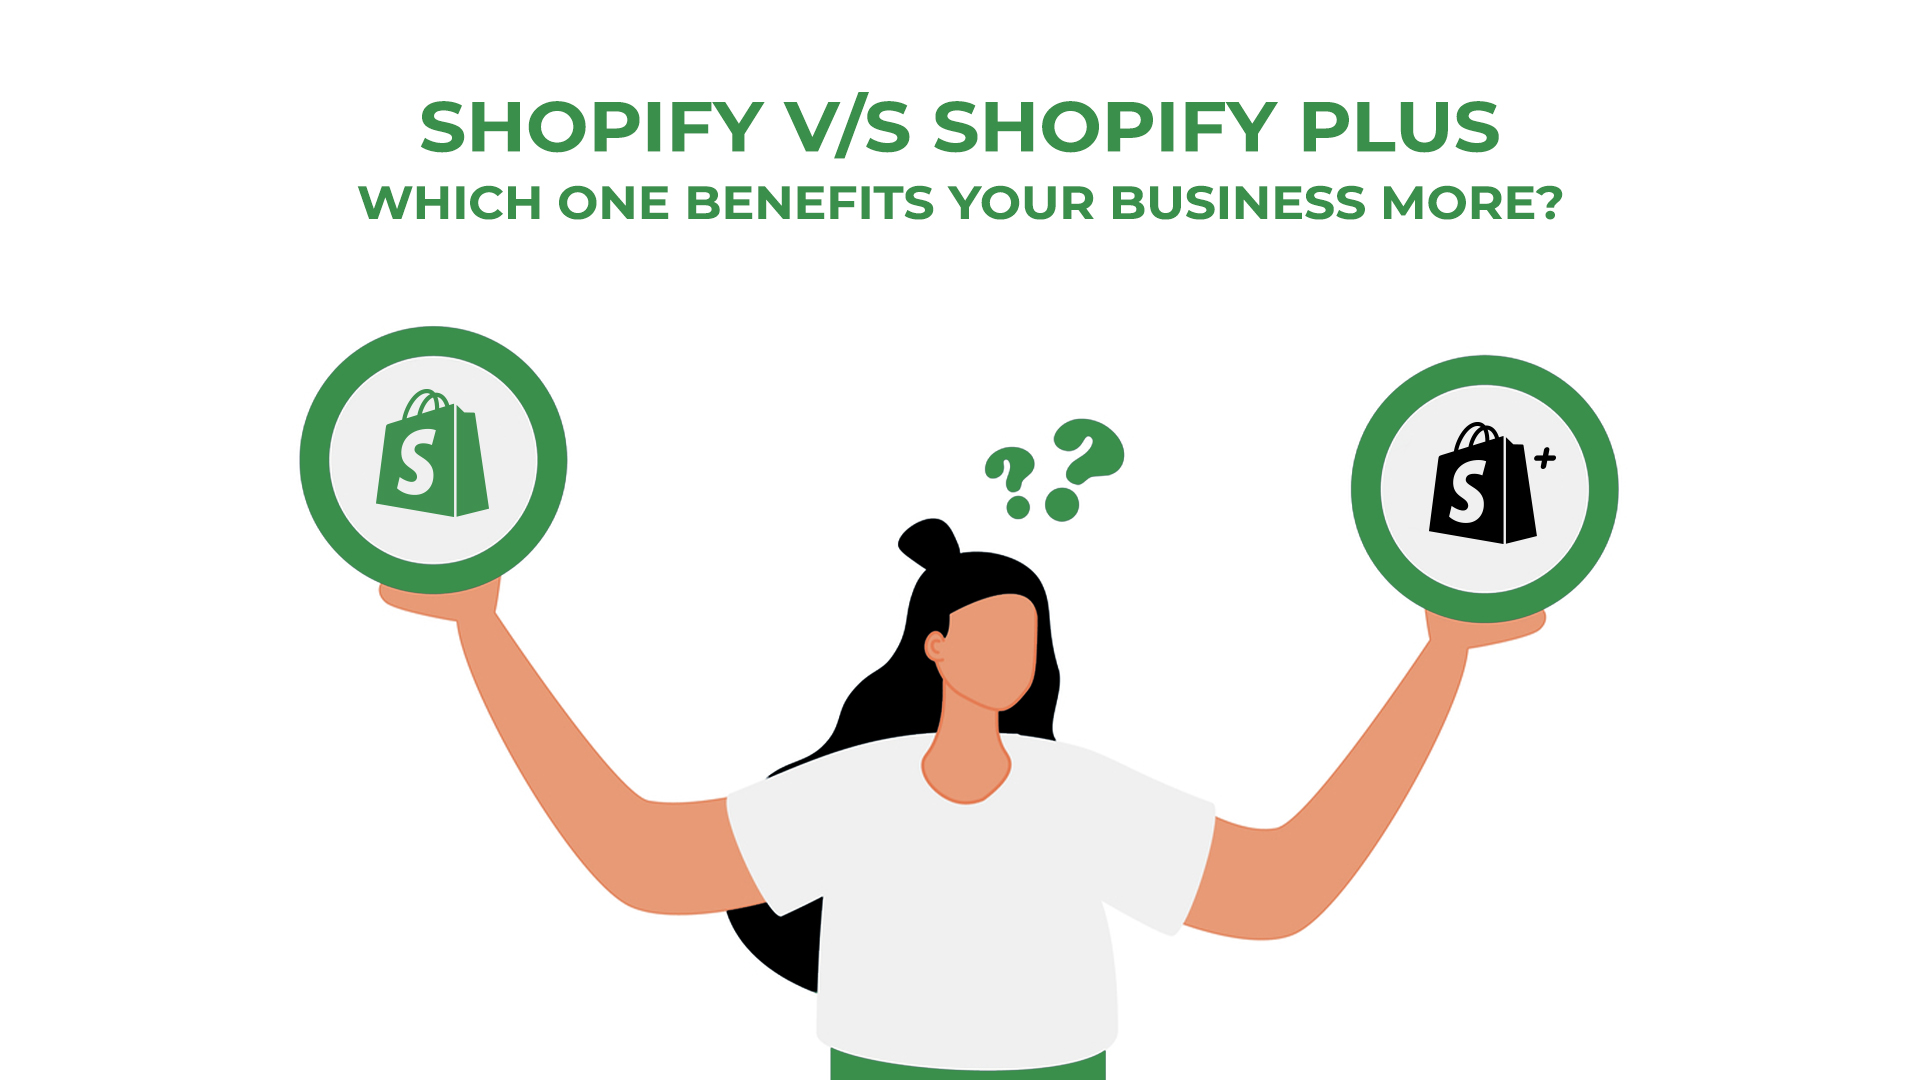 Shopify v/s Shopify plus: Which one benefits your business more?